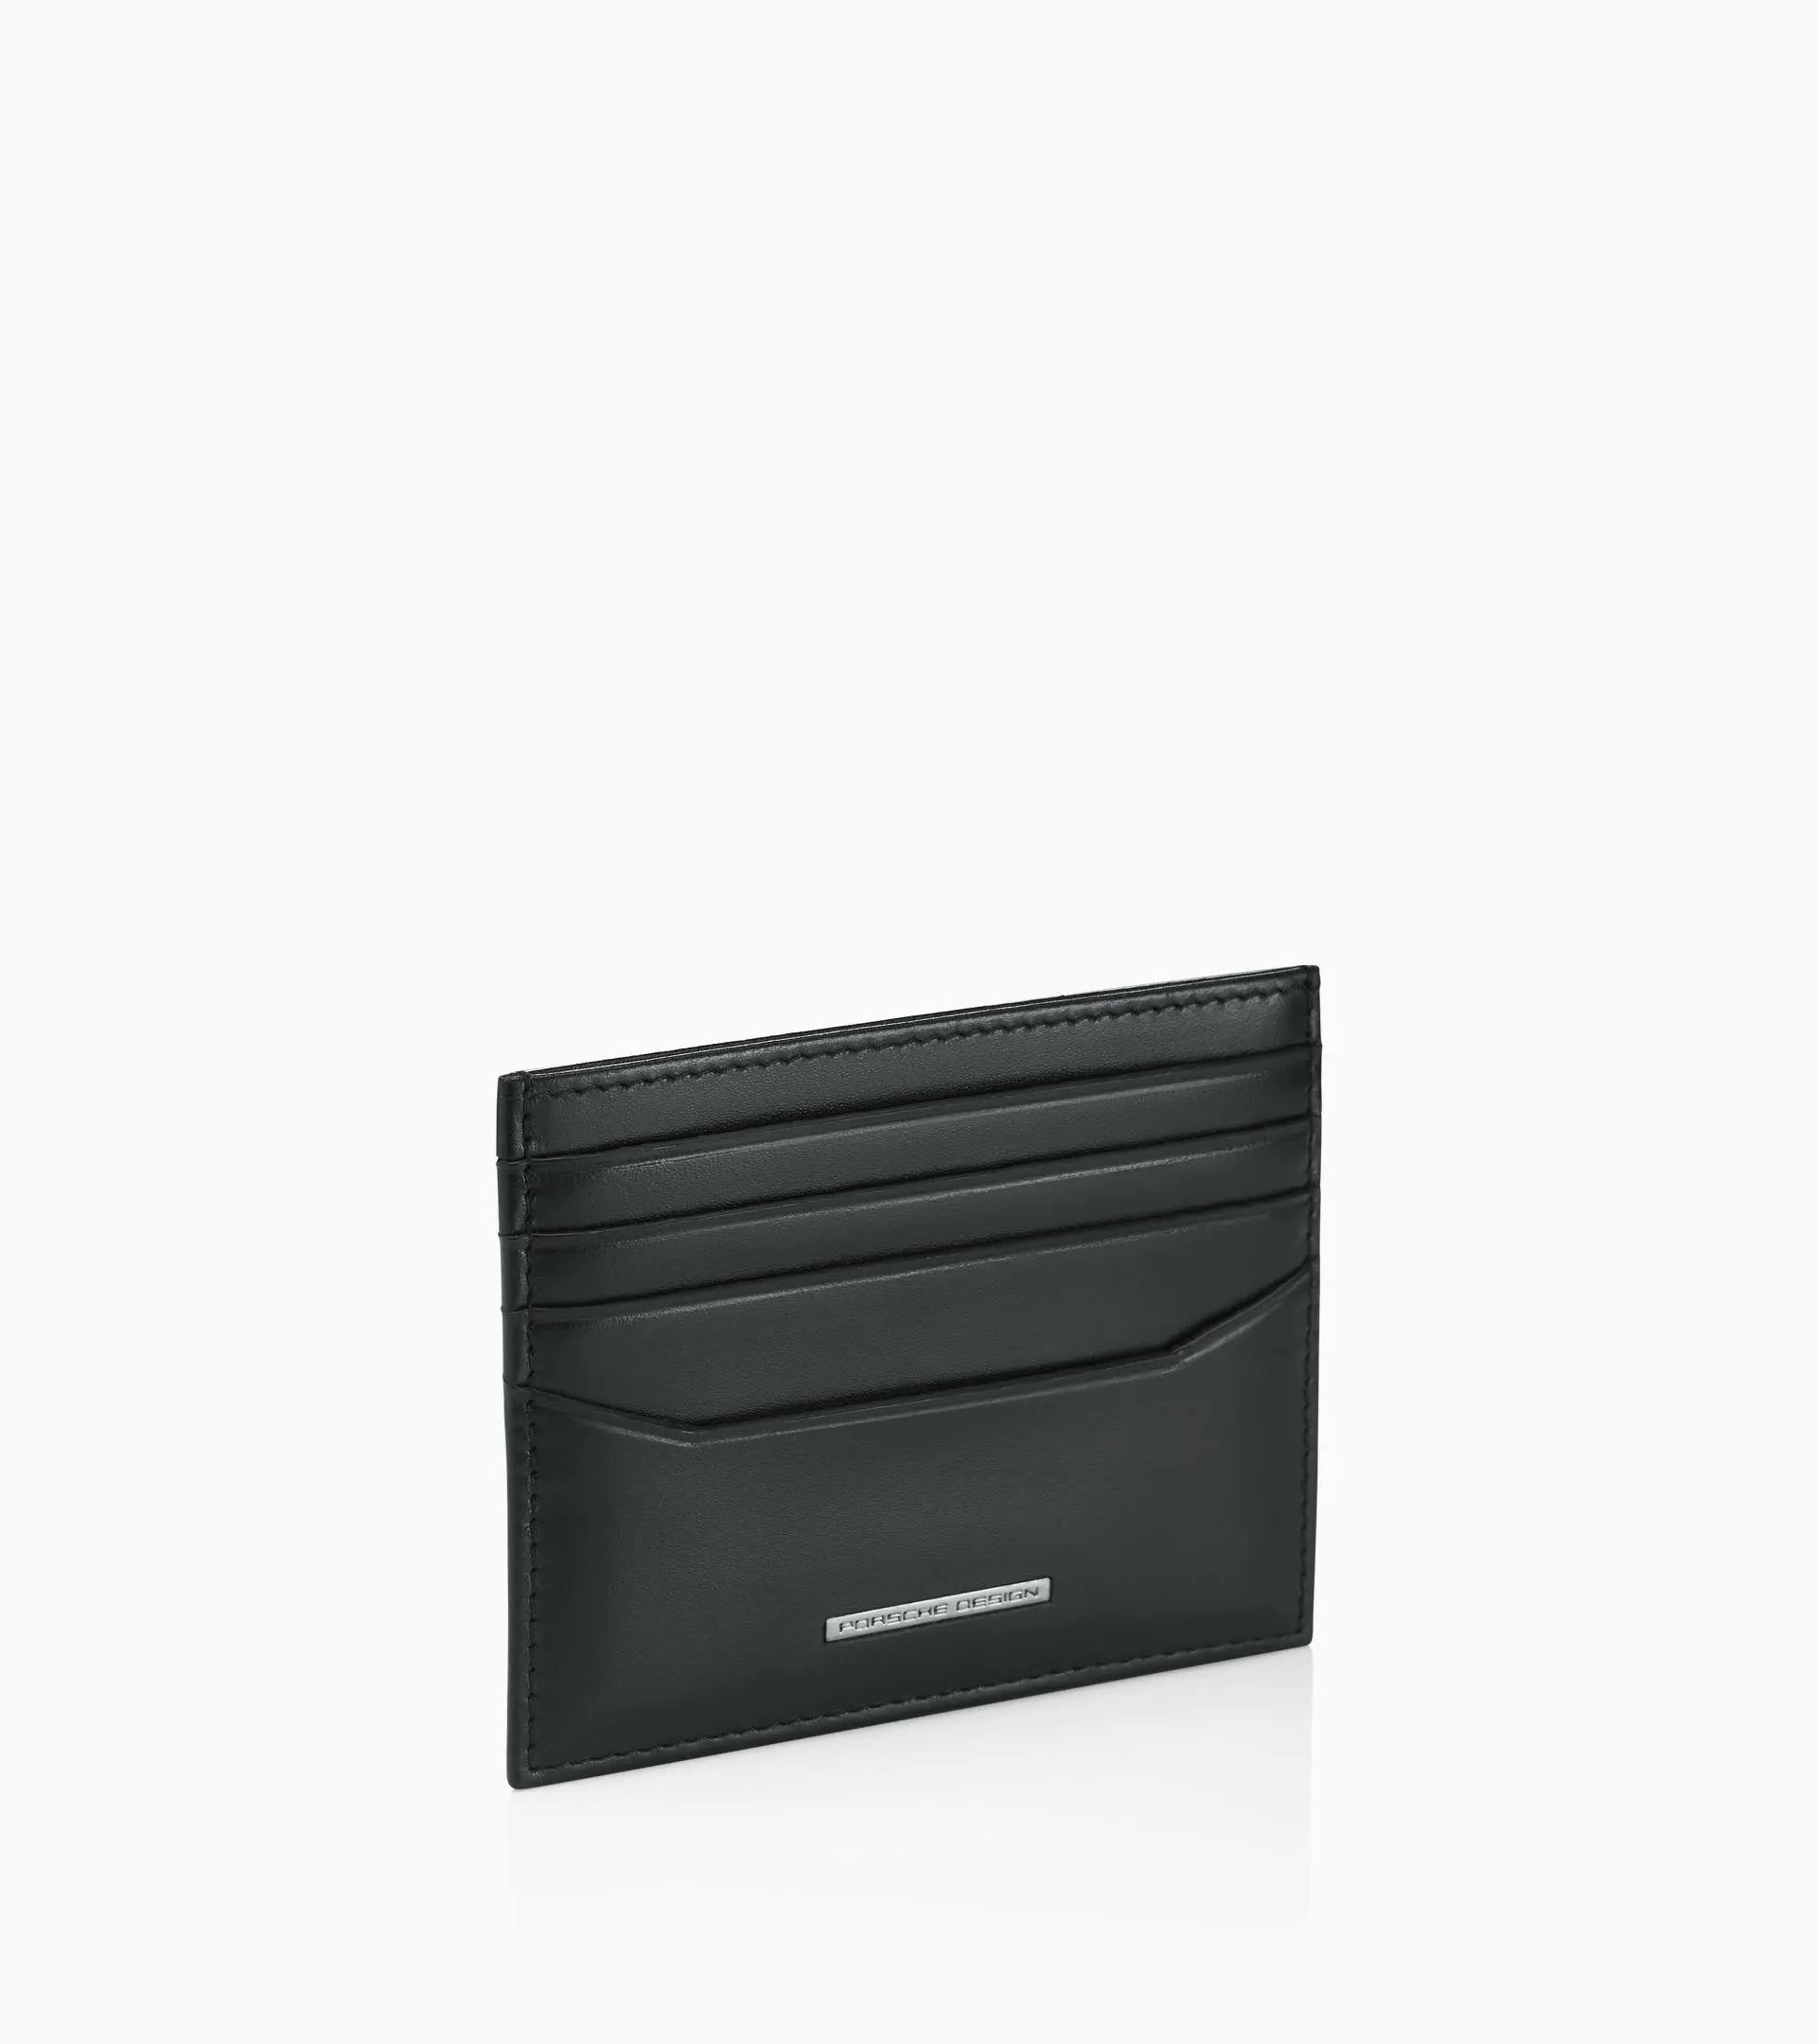 Timeless/Classique leather card wallet